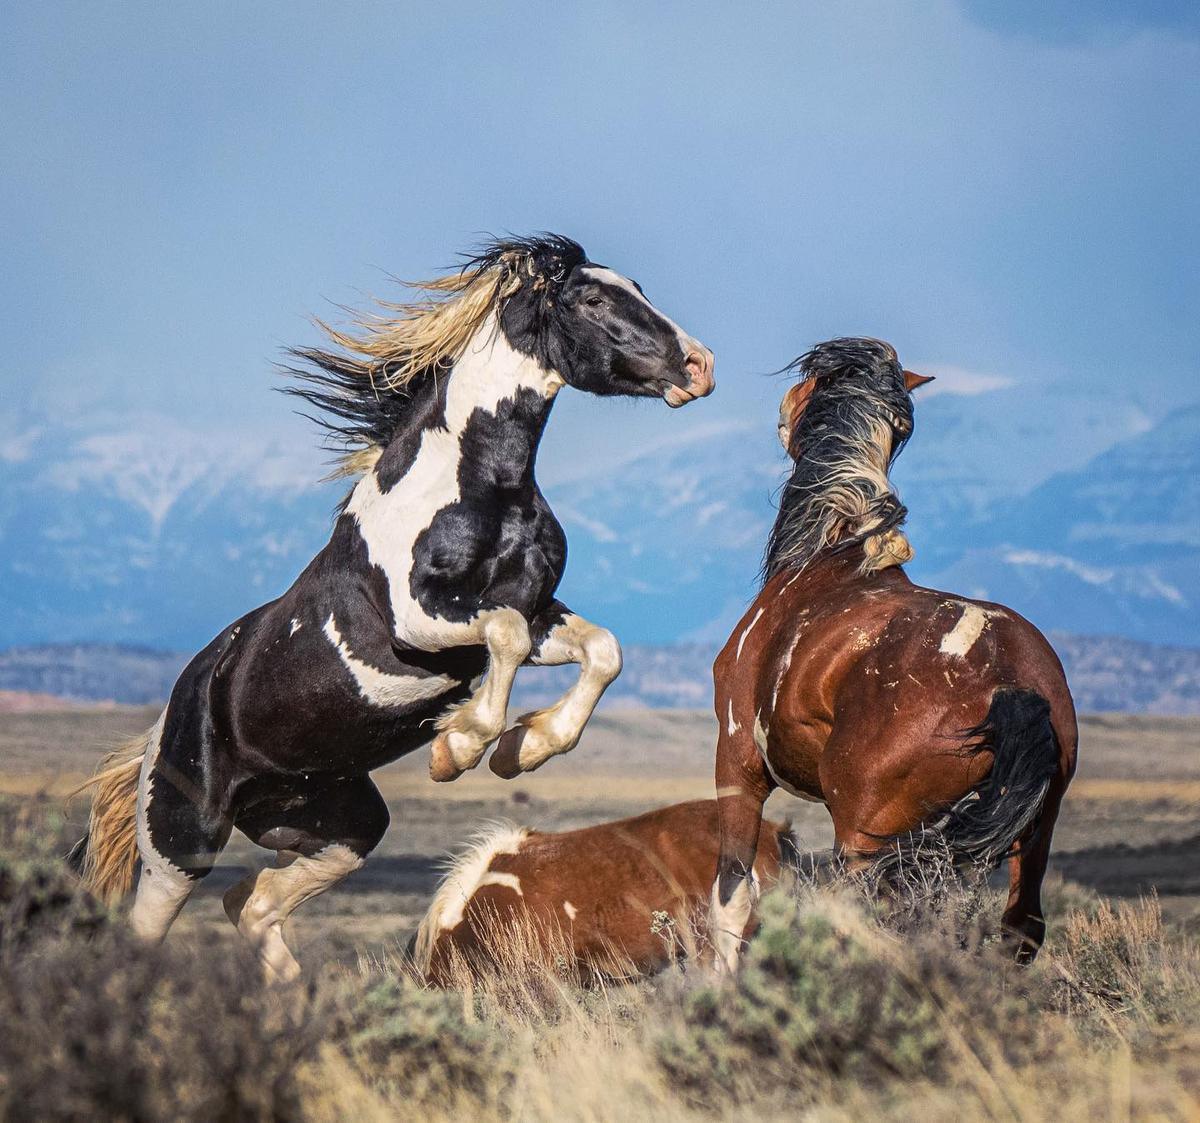 Springtime sparring at McCullough Peaks, with snow-capped peaks in the background. (Courtesy of <a href="https://www.instagram.com/swgoudge/">Susan Goudge</a>)